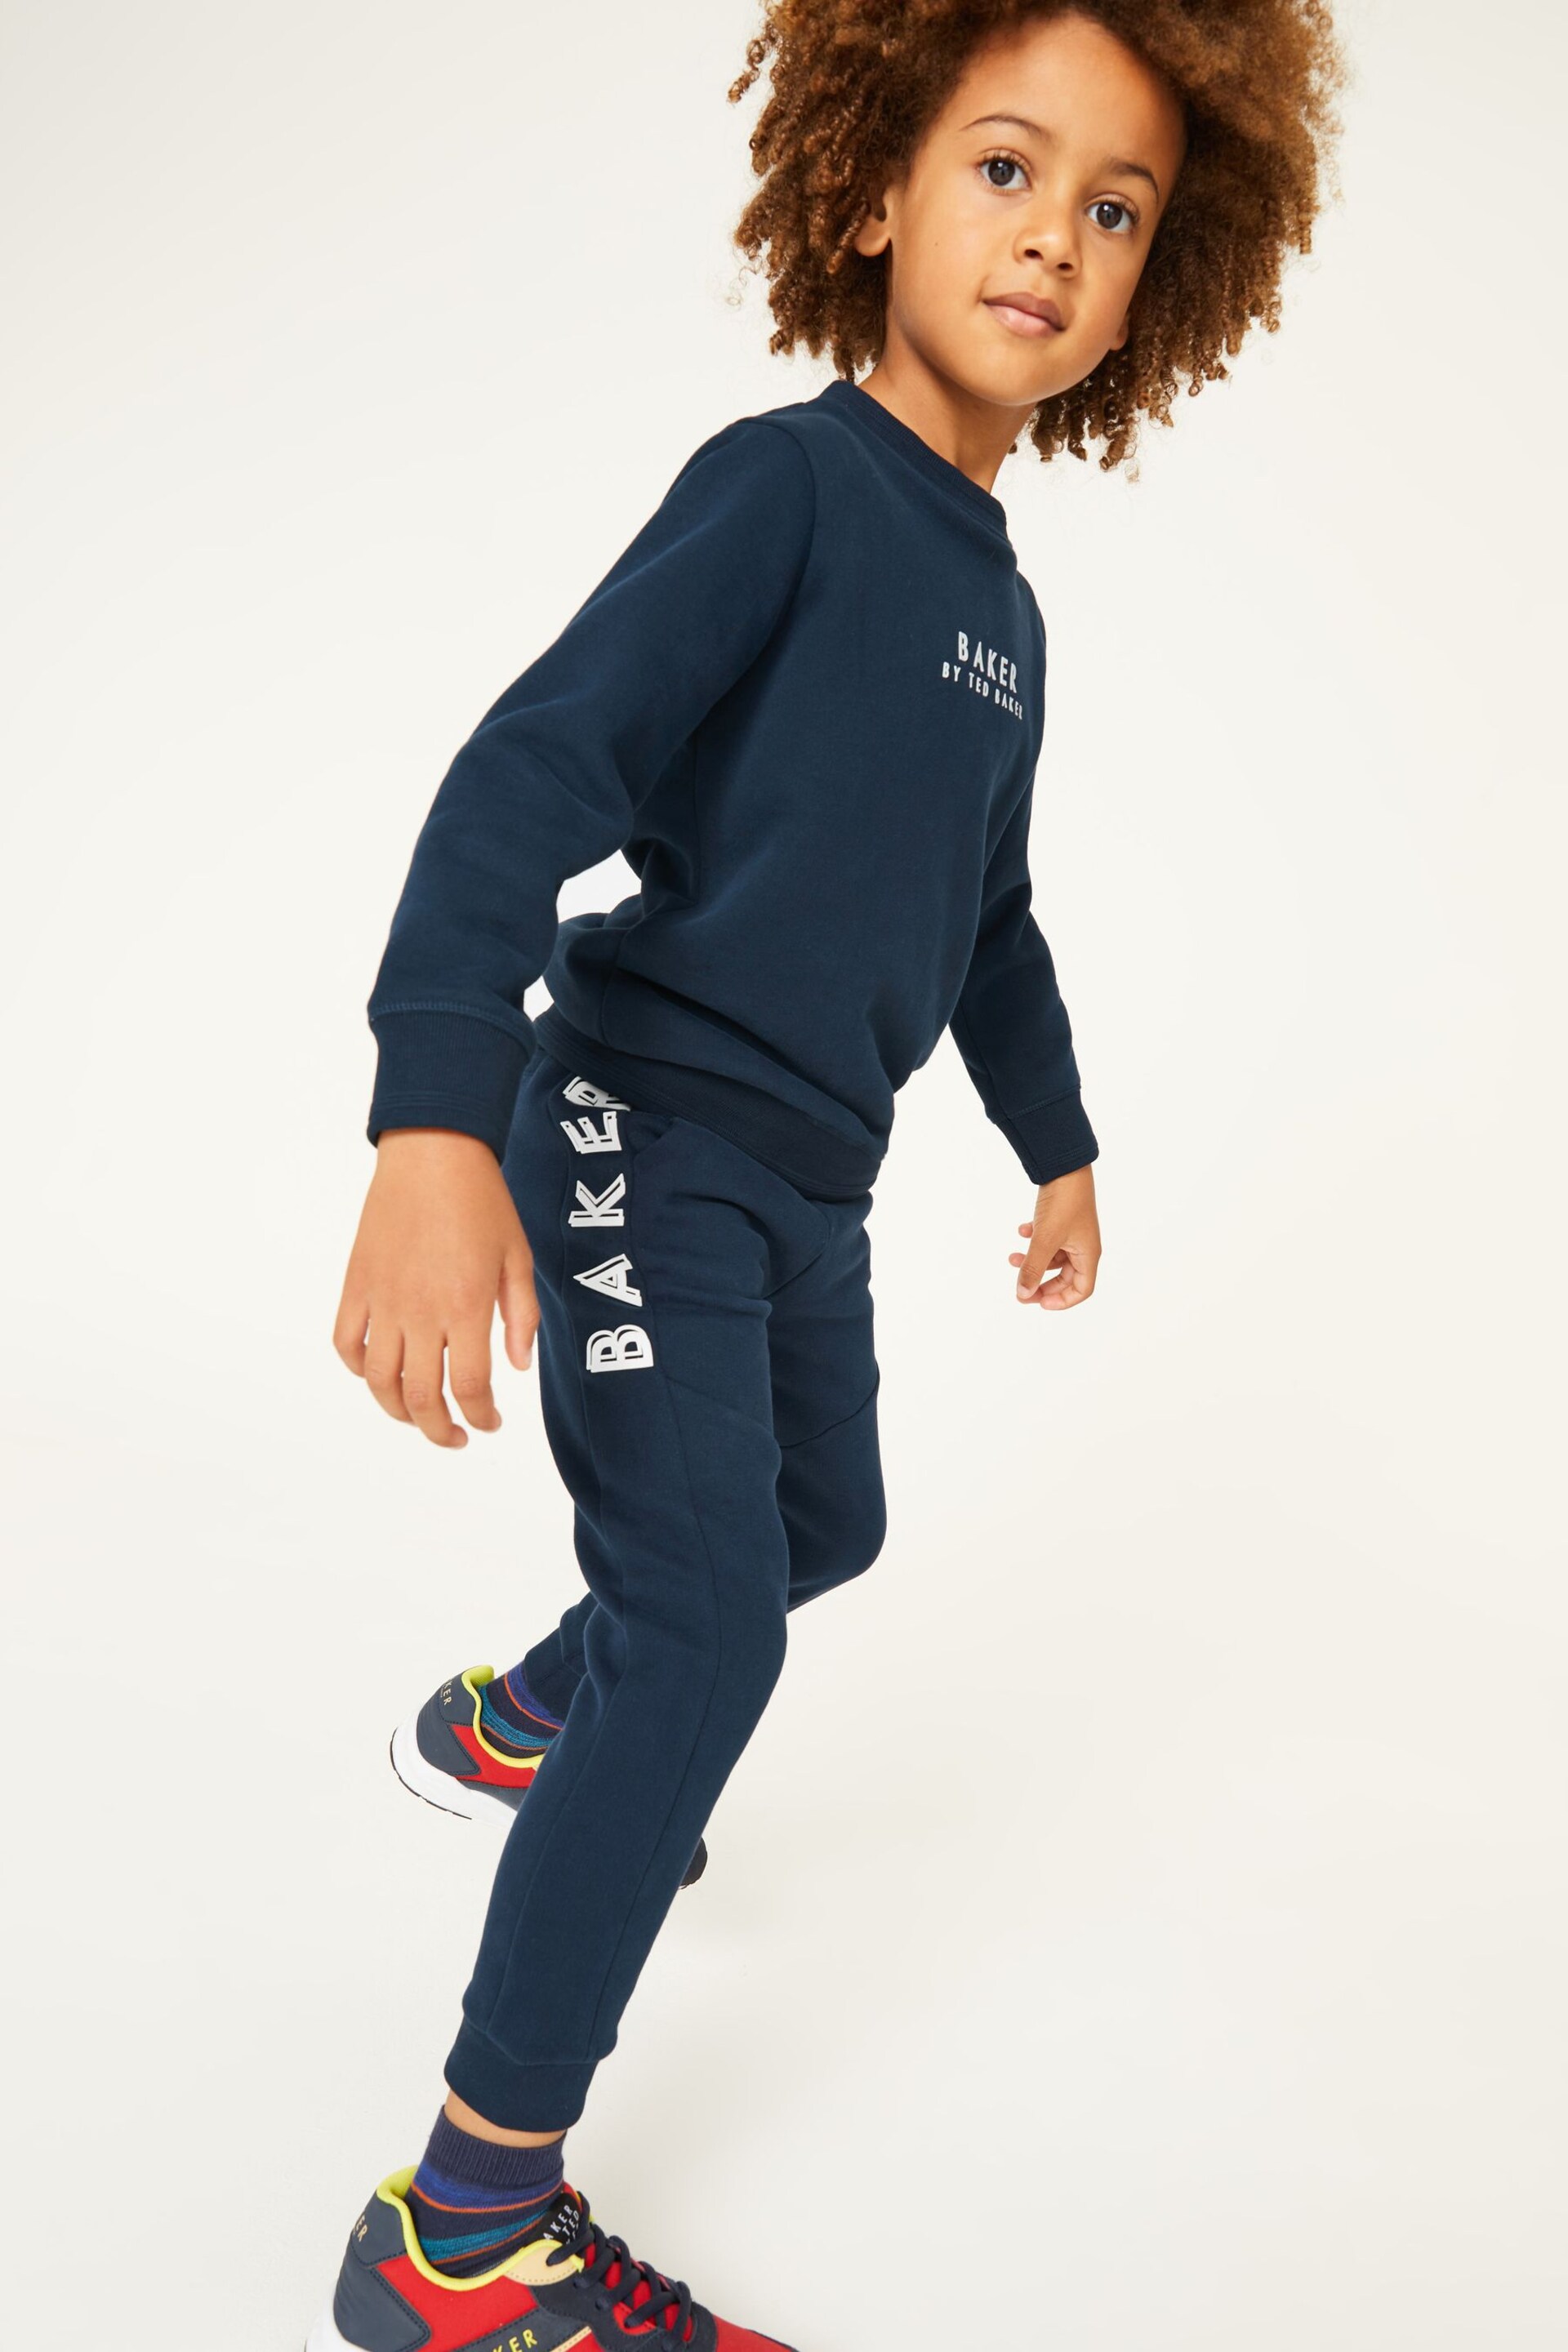 Baker by Ted Baker Joggers - Image 6 of 10